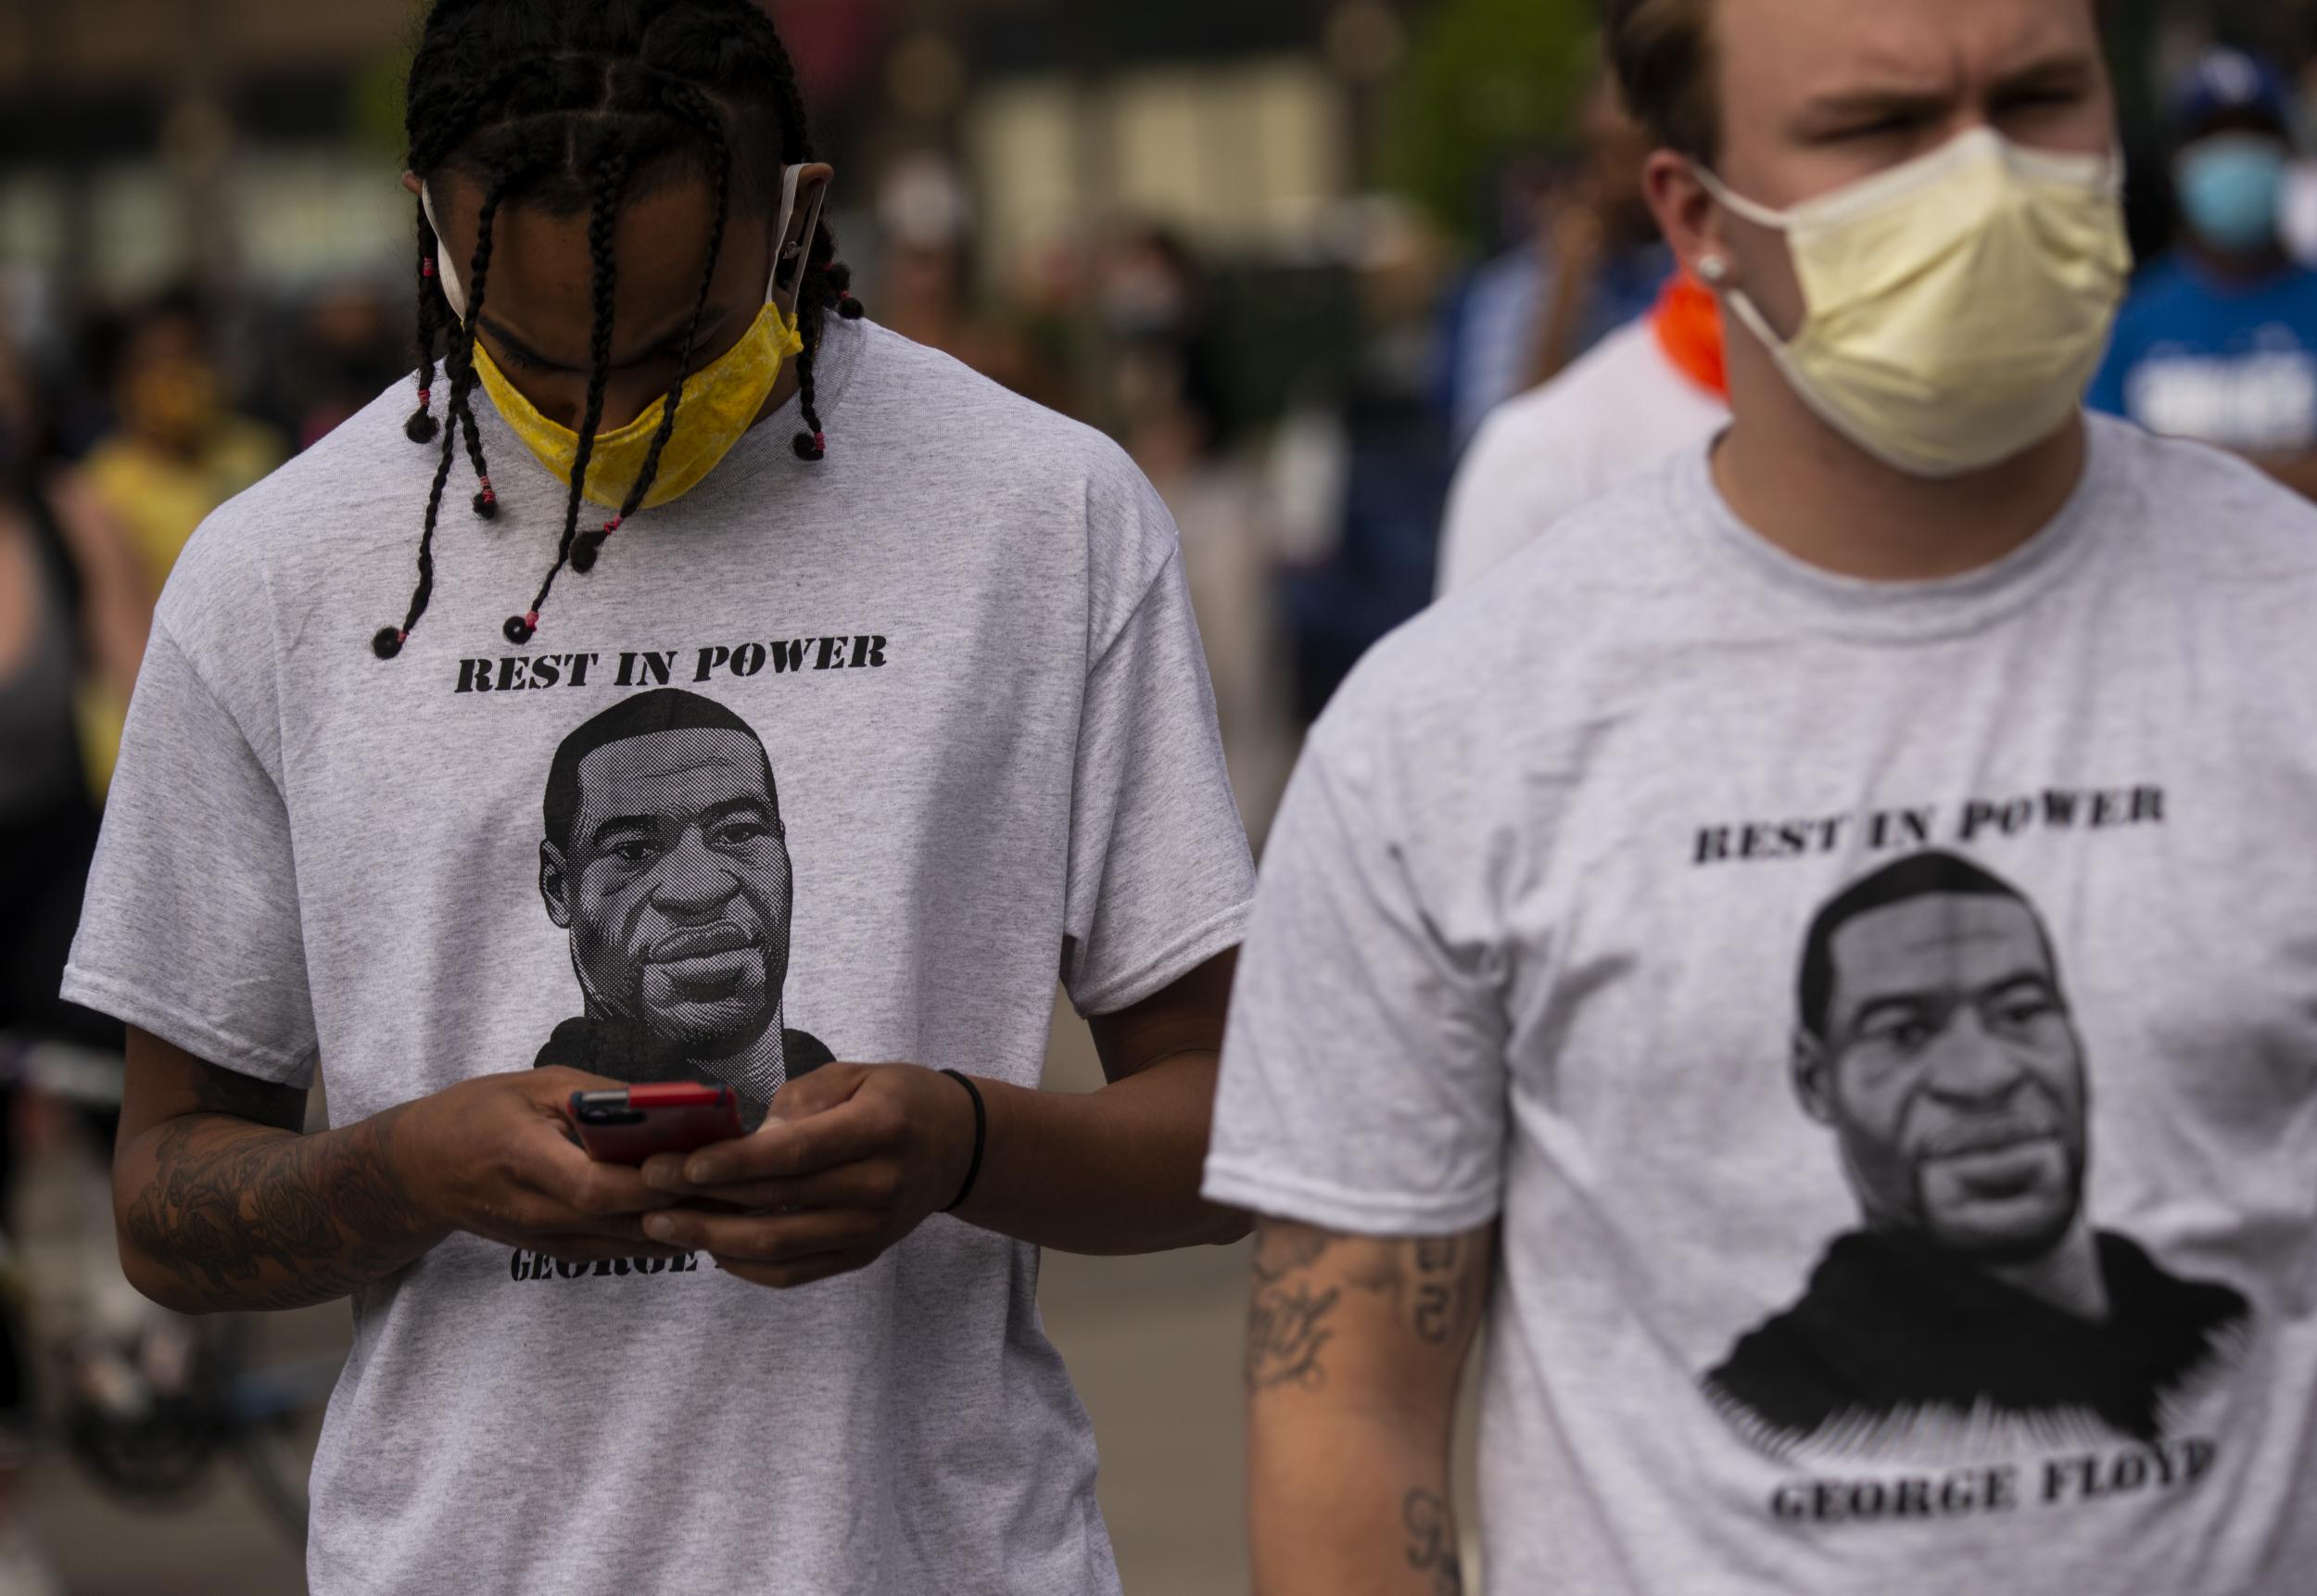 Protestors in Minnesota, wearing face masks and George Floyd T-shirts, march against police brutality